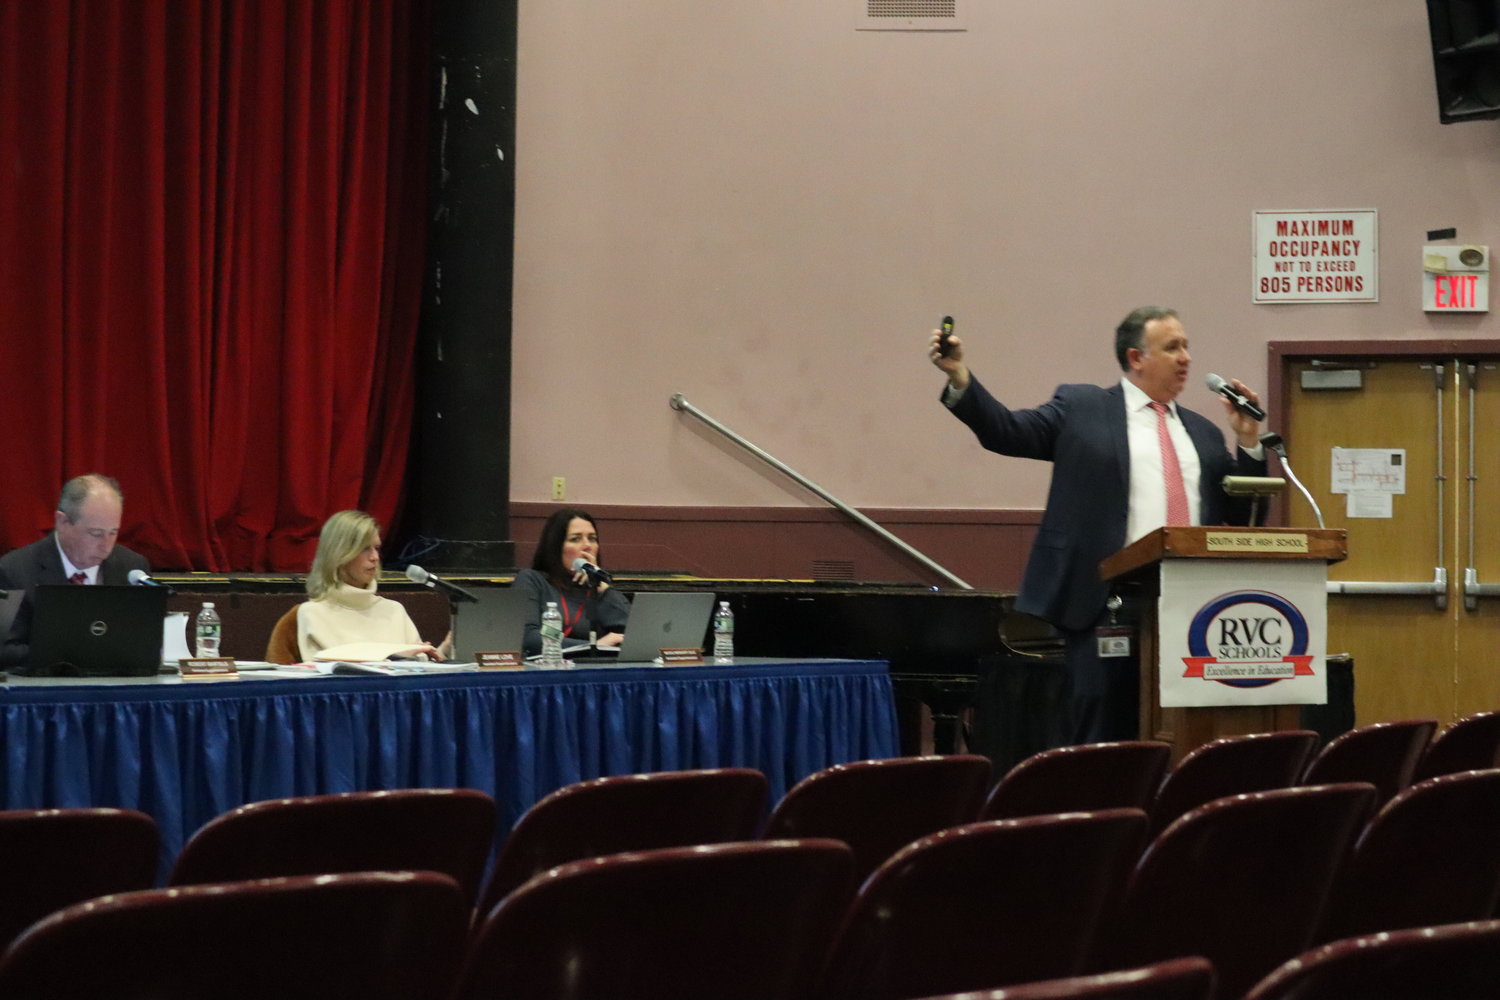 Rockville Centre schools Superintendent Matt Gaven presented a breakdown of the results of the district’s survey to the Board of Education and the public.